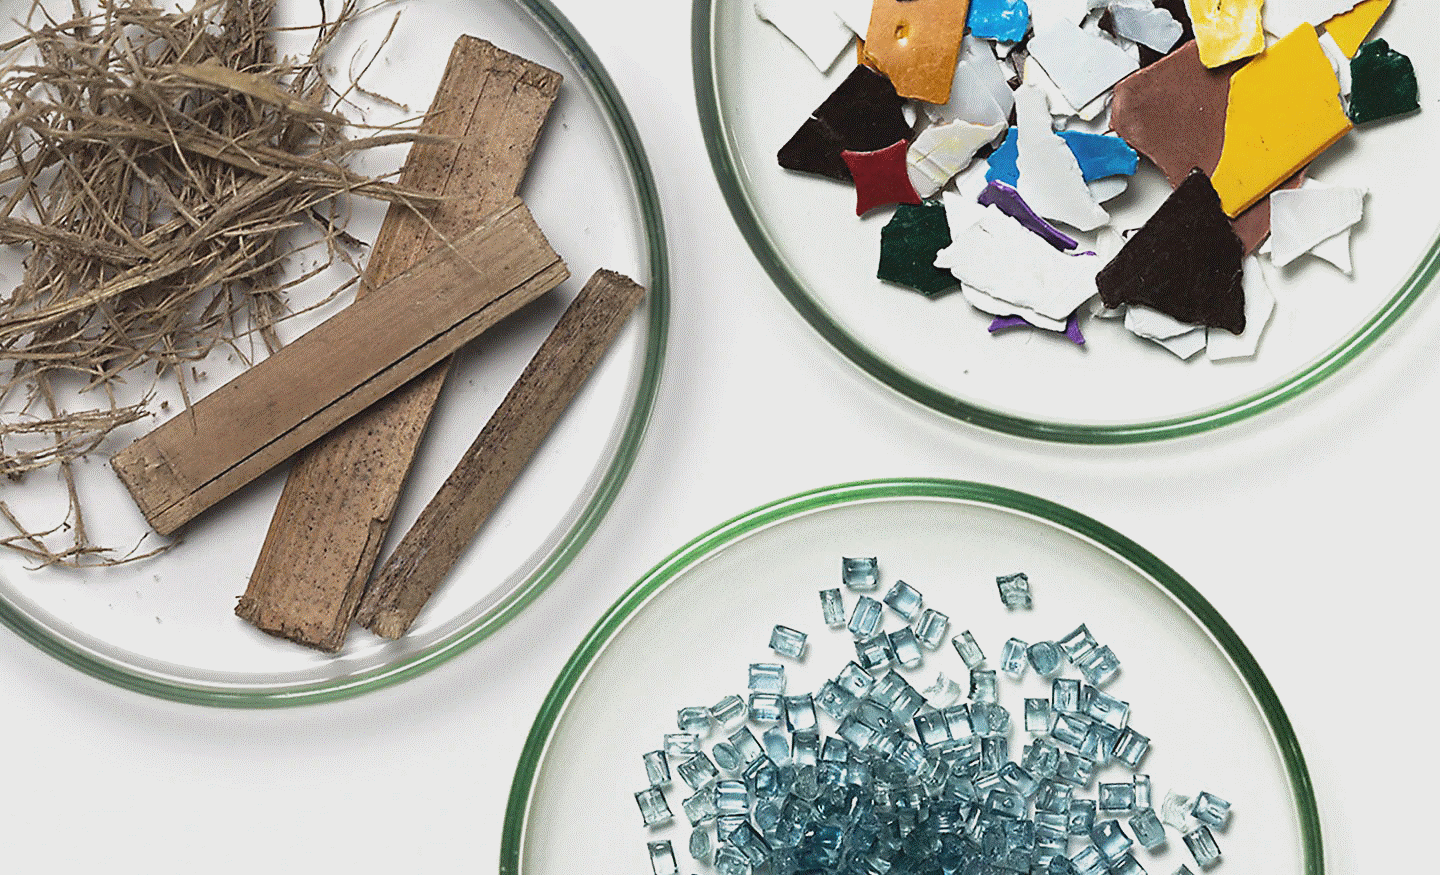 Image of various materials, including wood, glass and plastic on glass plates